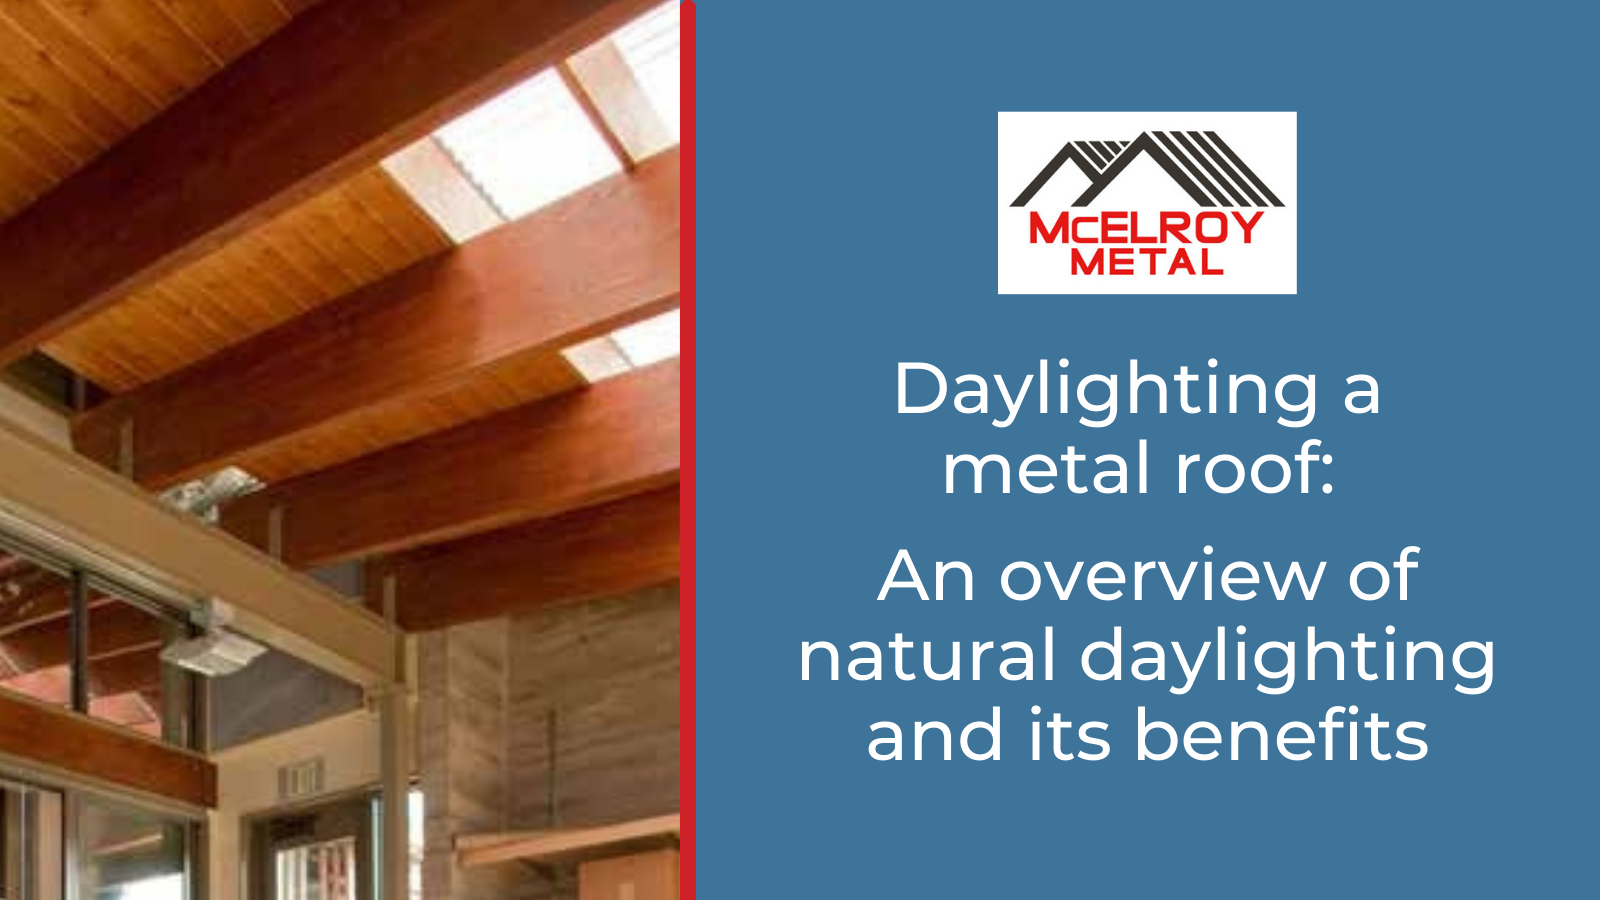 Daylighting a metal roof: An overview of natural daylighting benefits